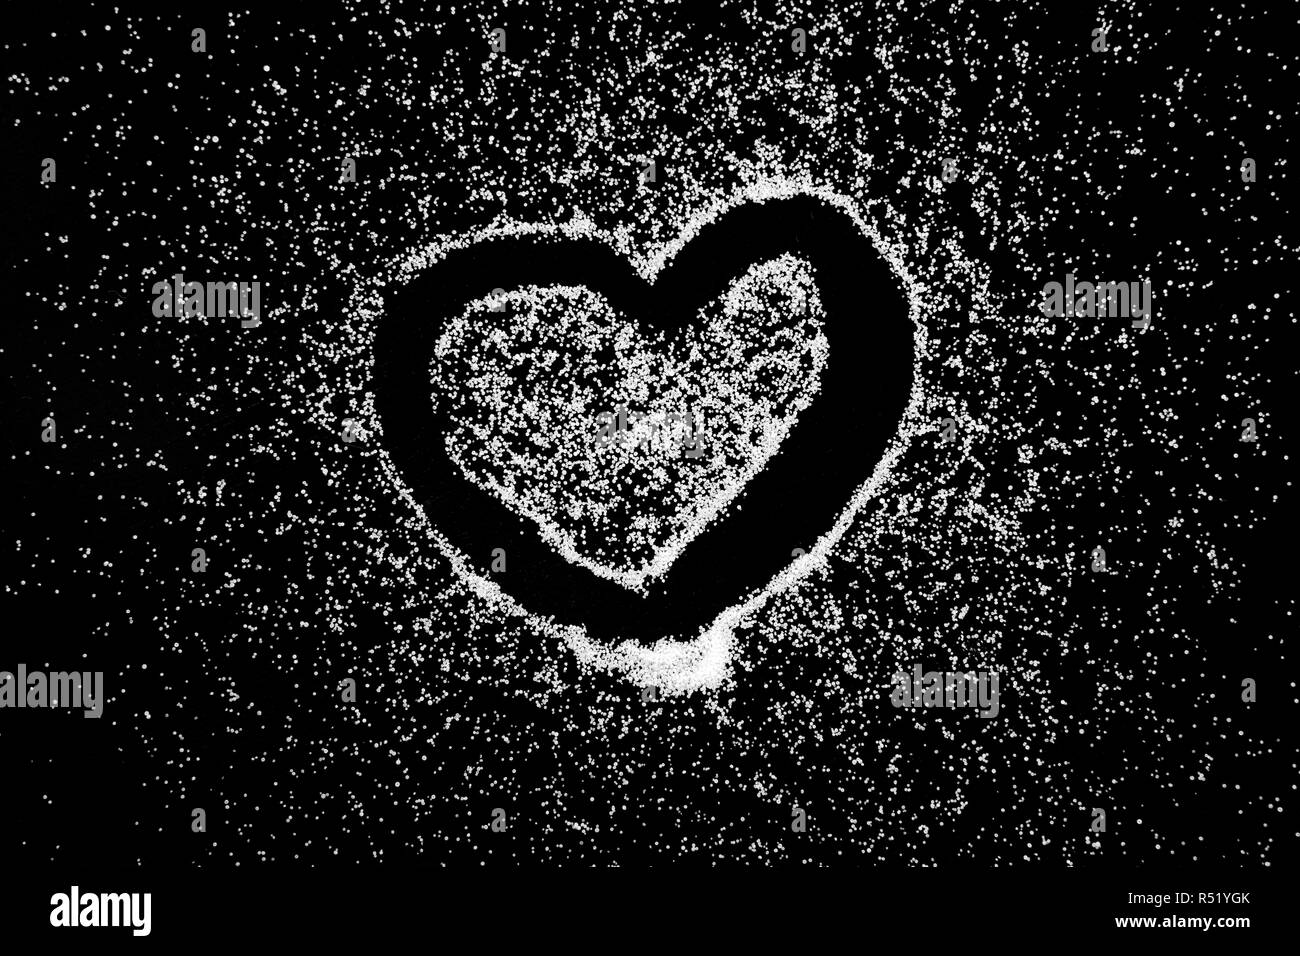 Closed love heart symbol drawing by finger on white salt powder on black background. Romantic St. Valentines Day holidays concept with place for text. Copy space. Stock Photo